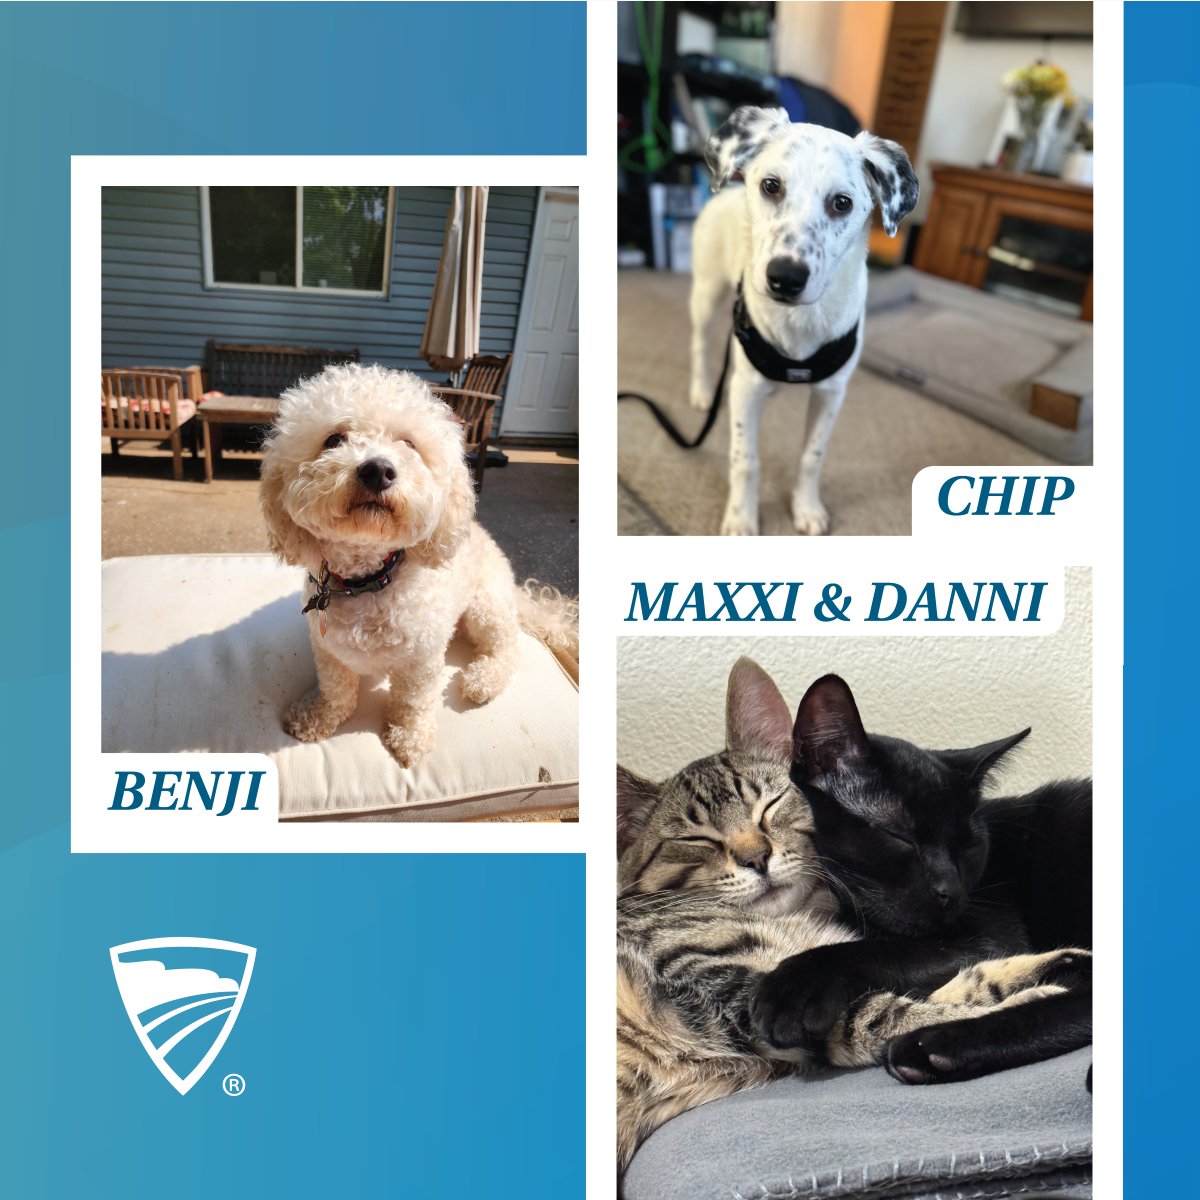 Happy National Pet Day! An entire day dedicated to the joy and companionship that pets bring to our lives. Enjoy these pet photos from our employees and share yours in the comments! 🐾🩵